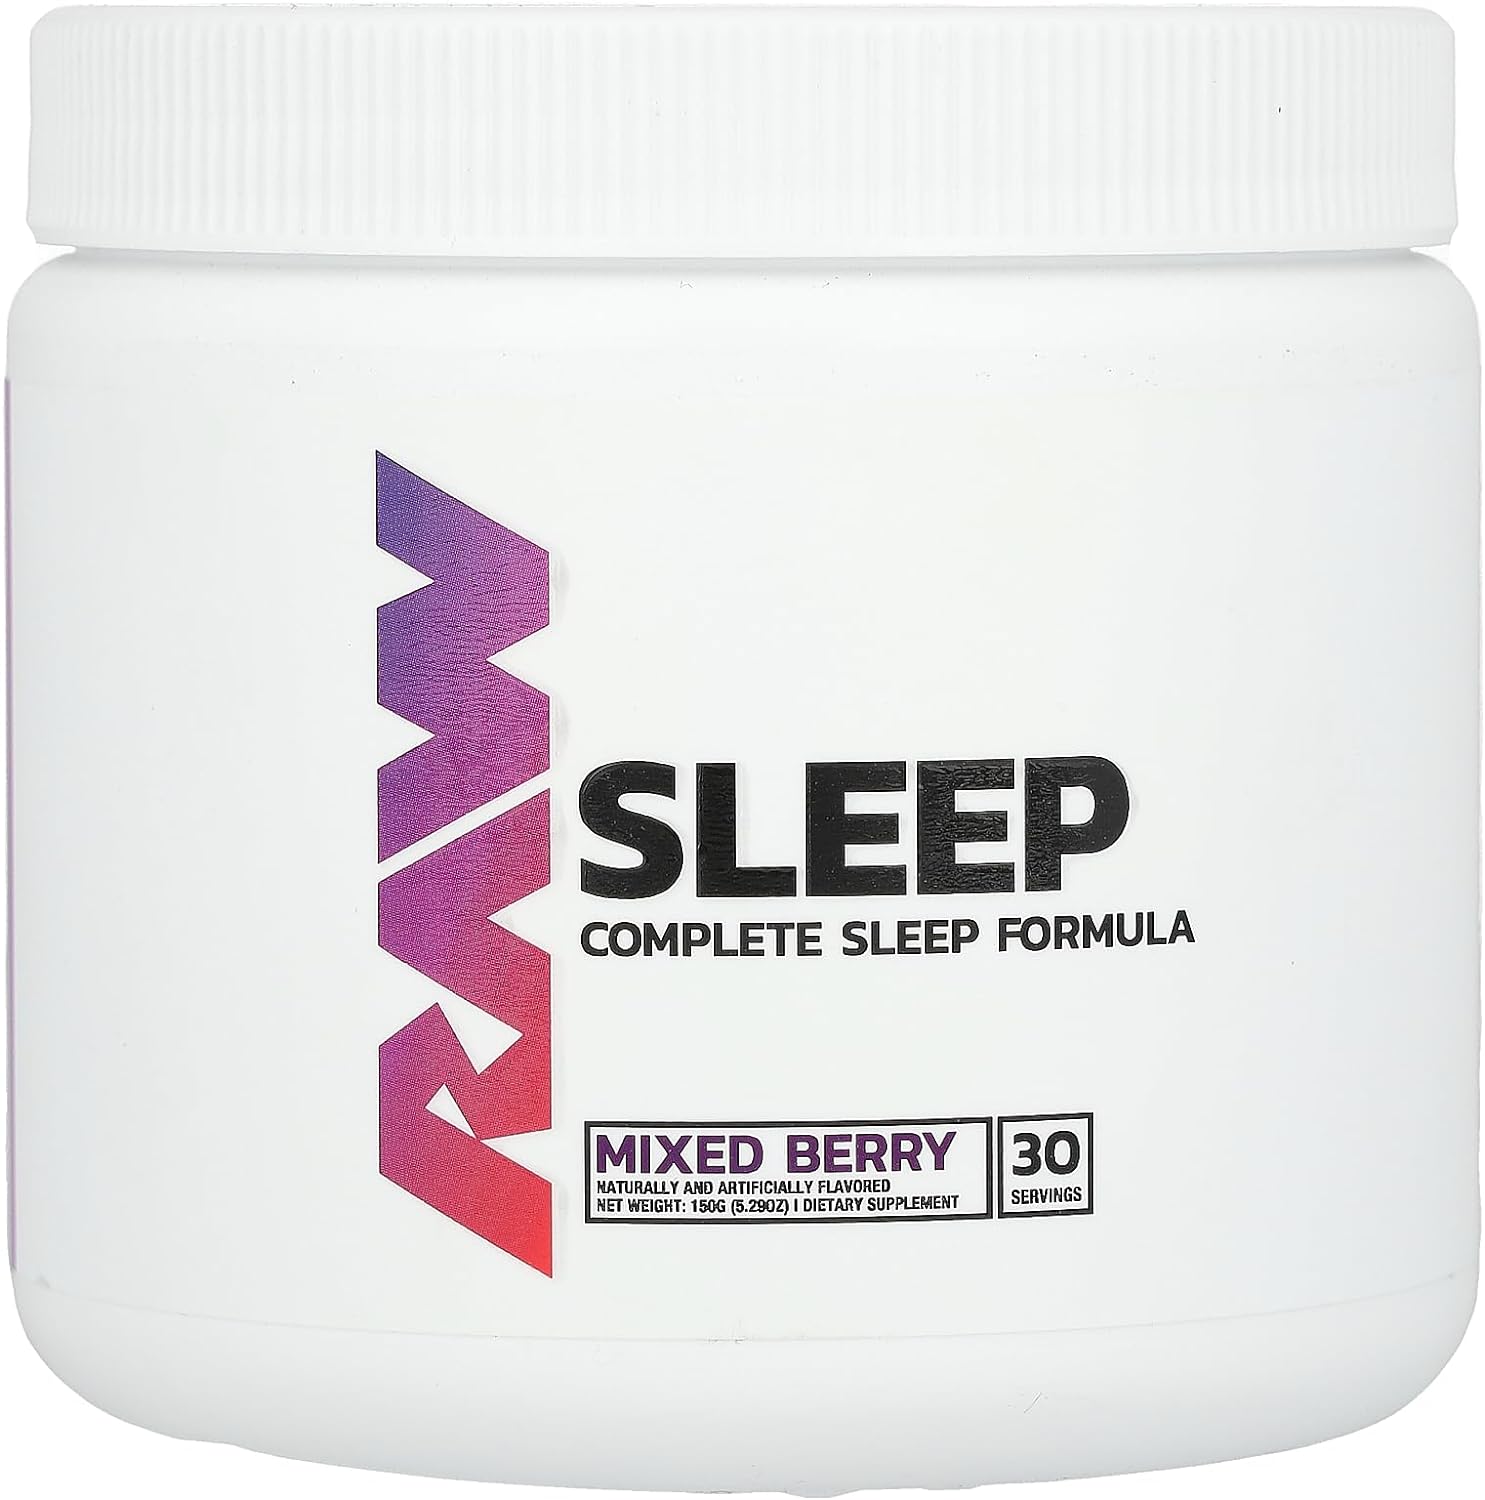 RAW Natural Sleep Aid Supplement - Relaxation Enhancer & Mood Support with Melatonin, Magnesium, Zinc, L-Tryptophan & Lemon Balm Extract to Relax & Calm The Mind & Body - 30 Servings, Mixed Berry